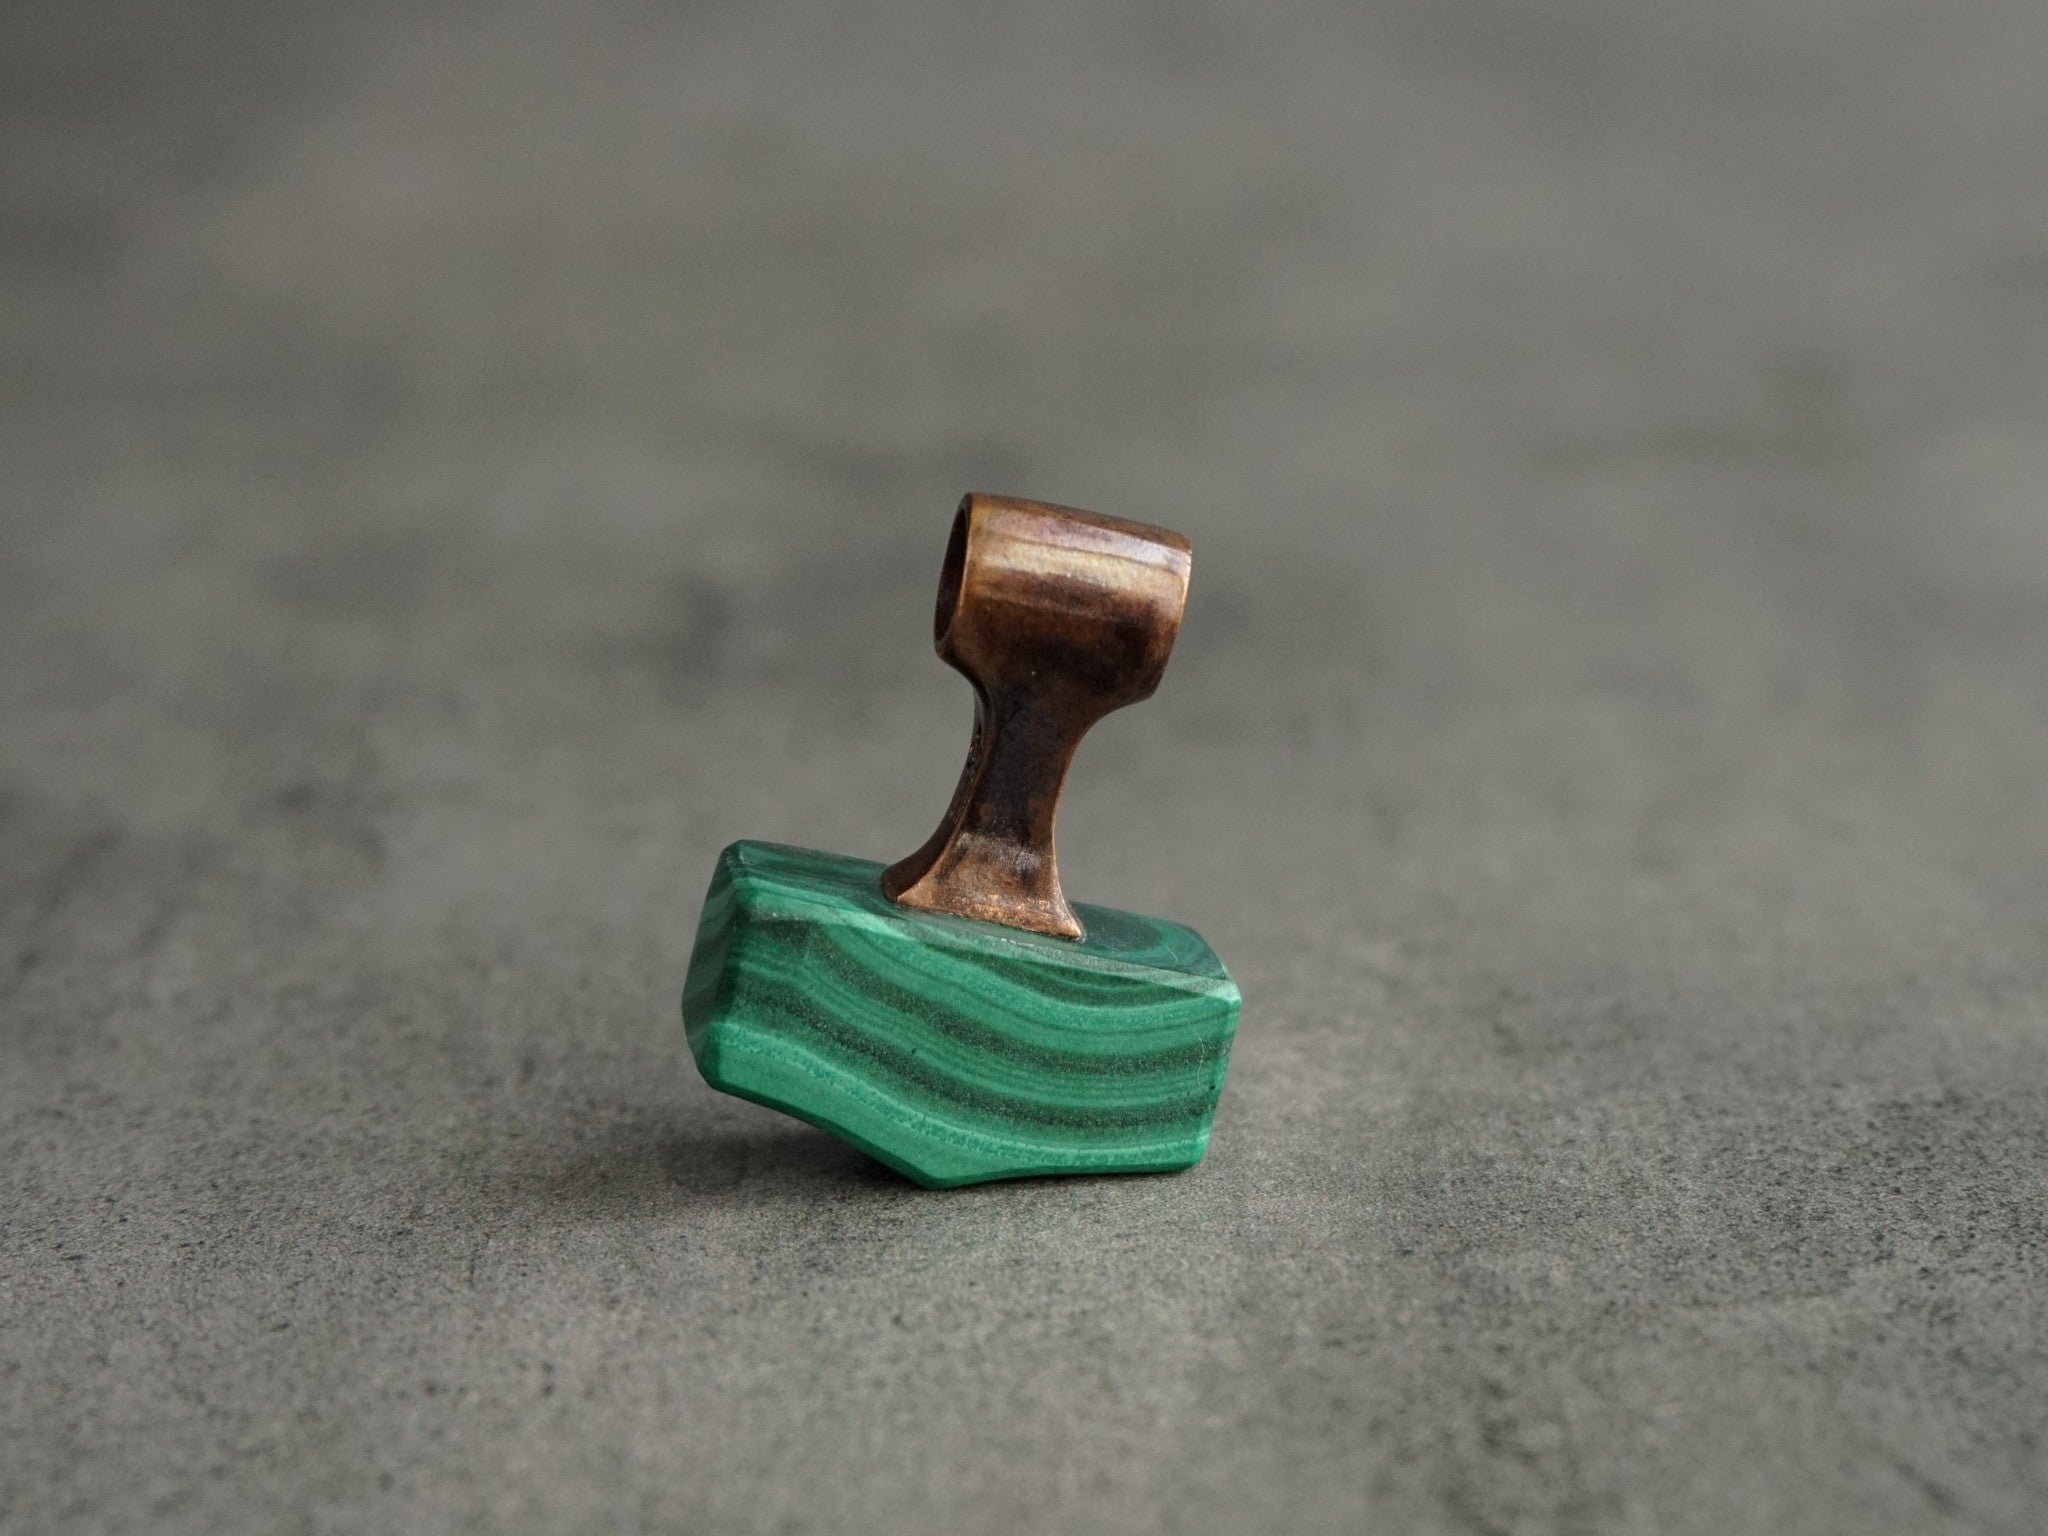 small bronze pendant with wavelike patterns in the green stone